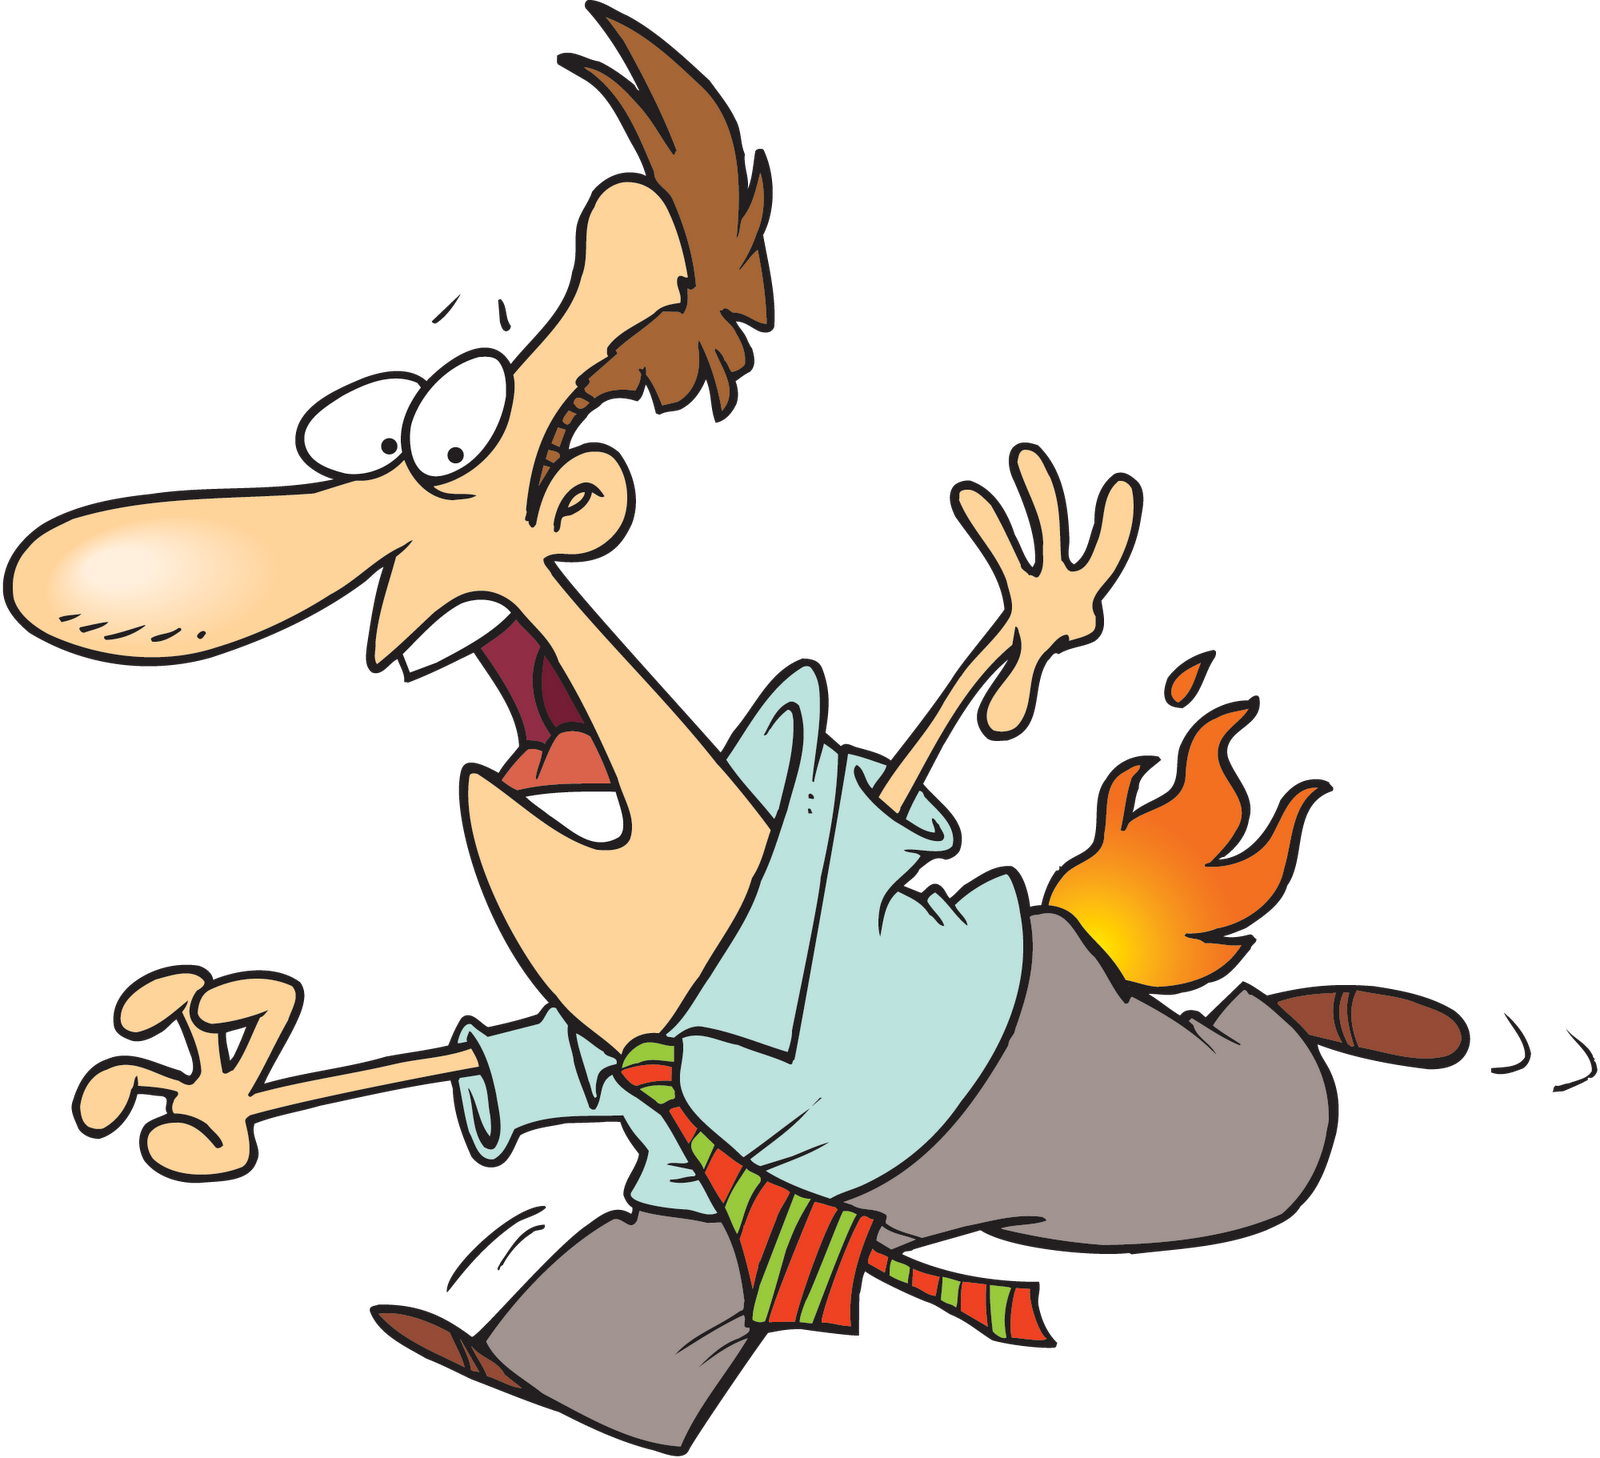 Download Cartoon Hut On Fire - Pants On Fire Clipart PNG Image with No  Background 